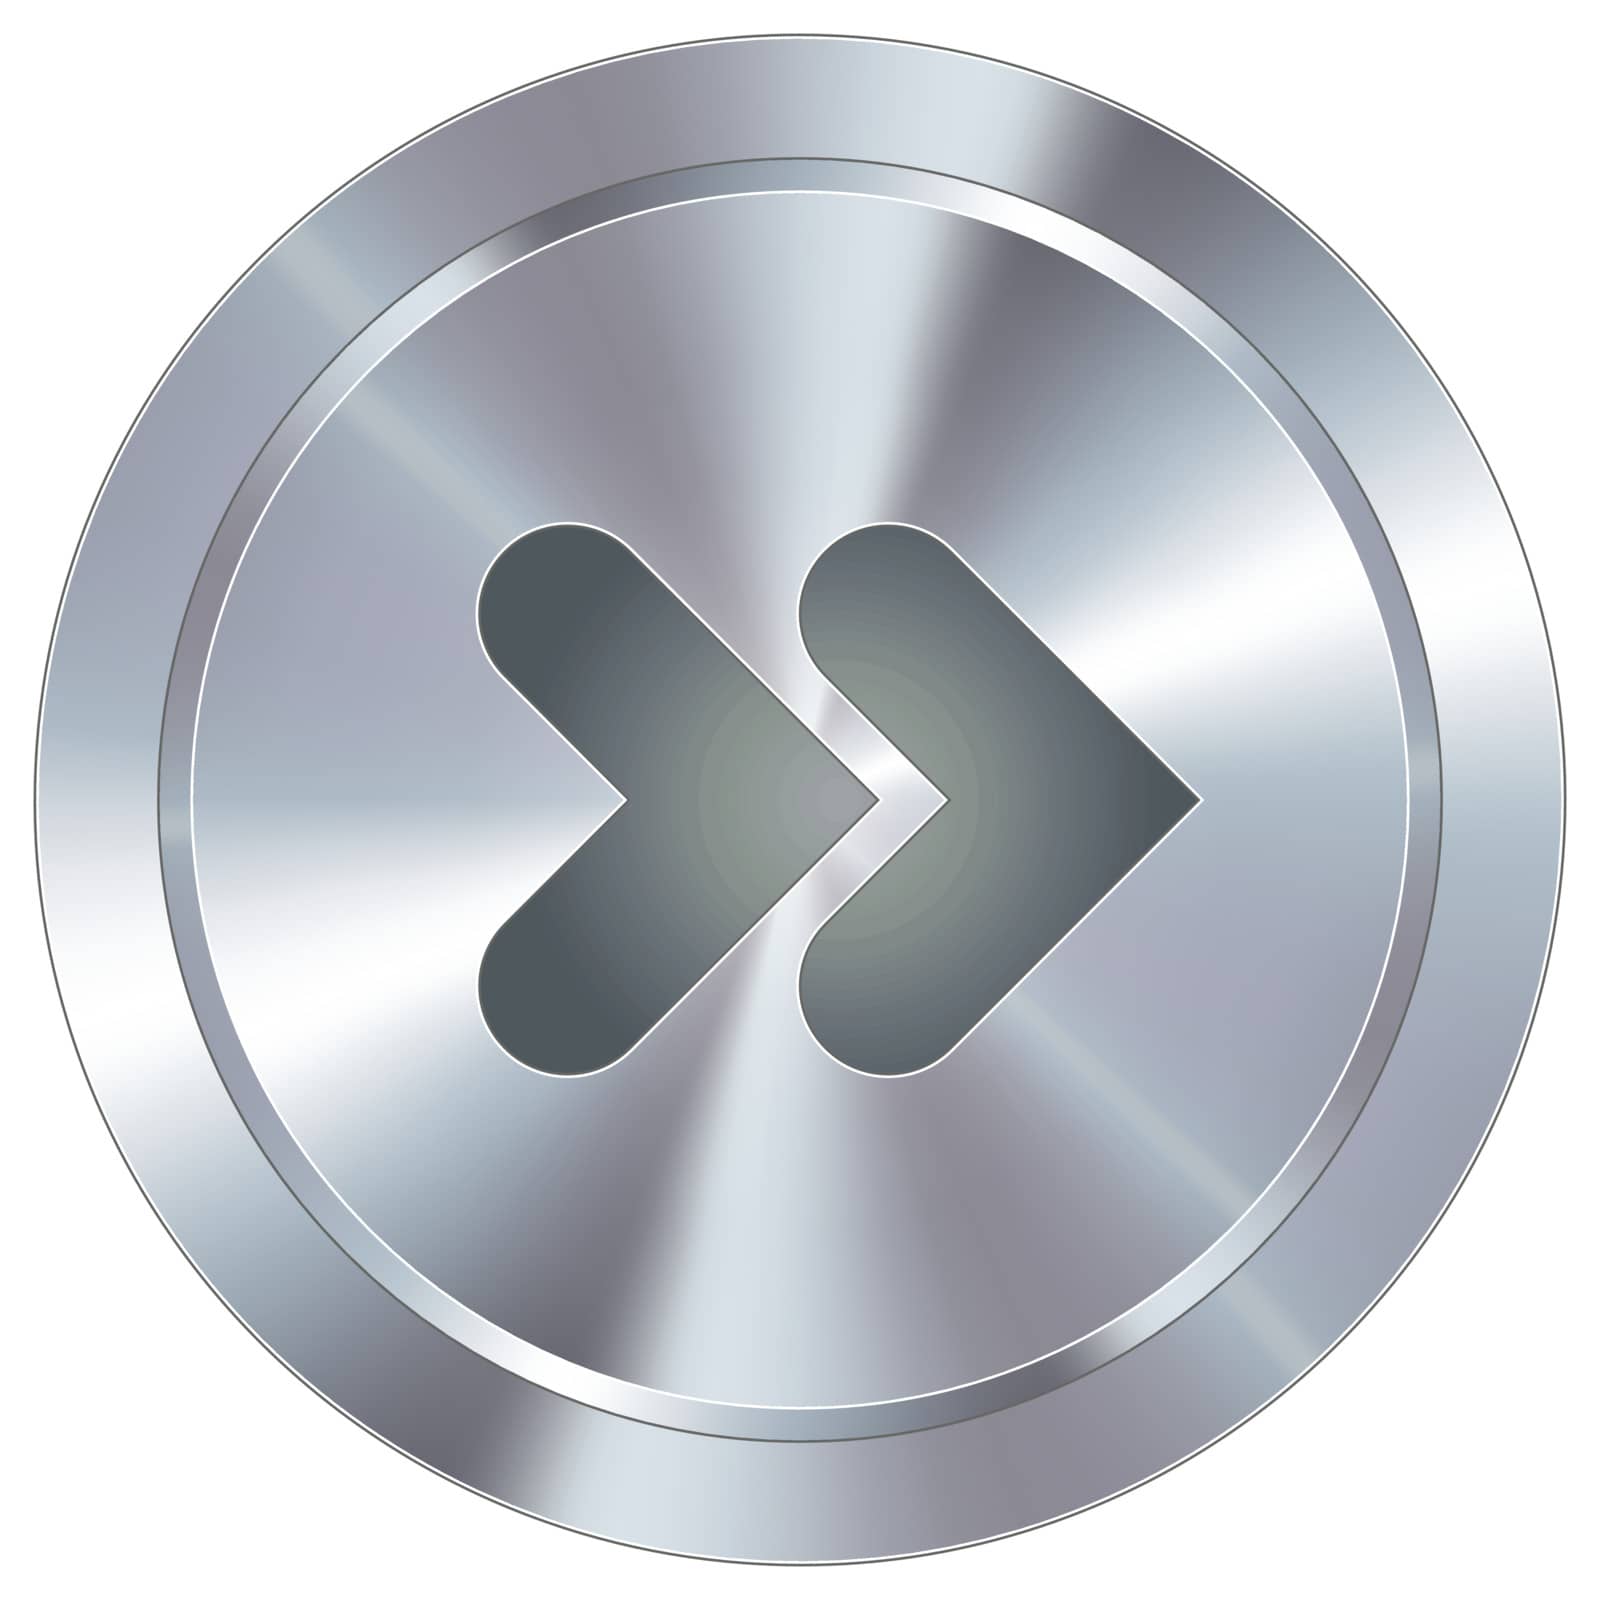 Forward media player industrial button by lhfgraphics